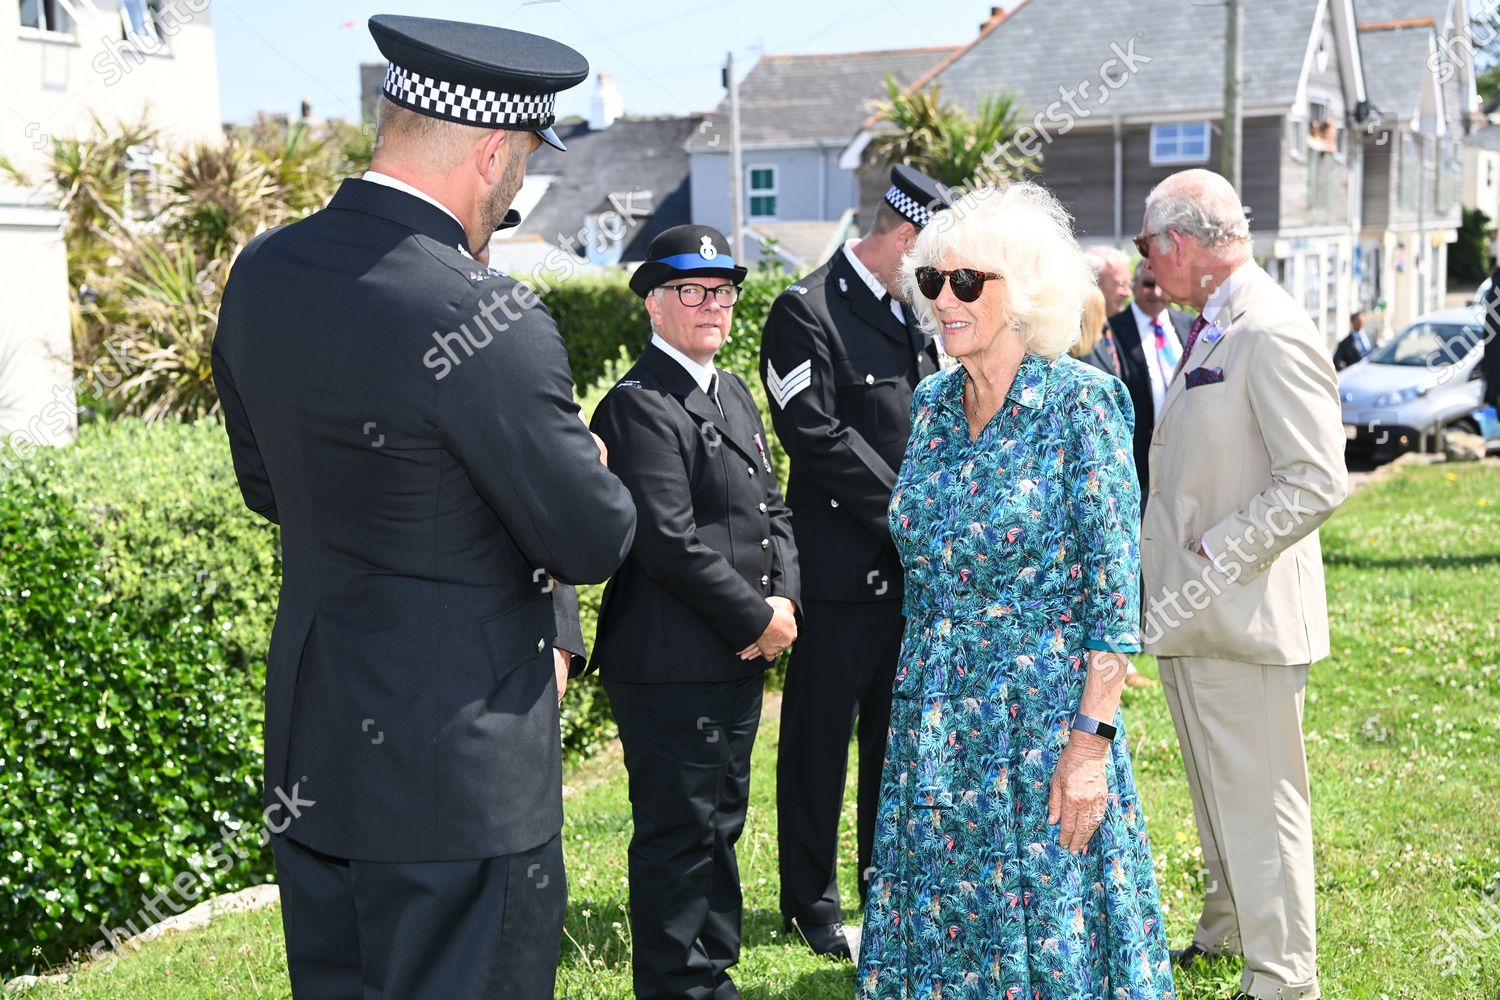 prince-charles-and-camilla-duchess-of-cornwall-visit-to-devon-and-cornwall-day-2-uk-shutterstock-editorial-12222608an.jpg